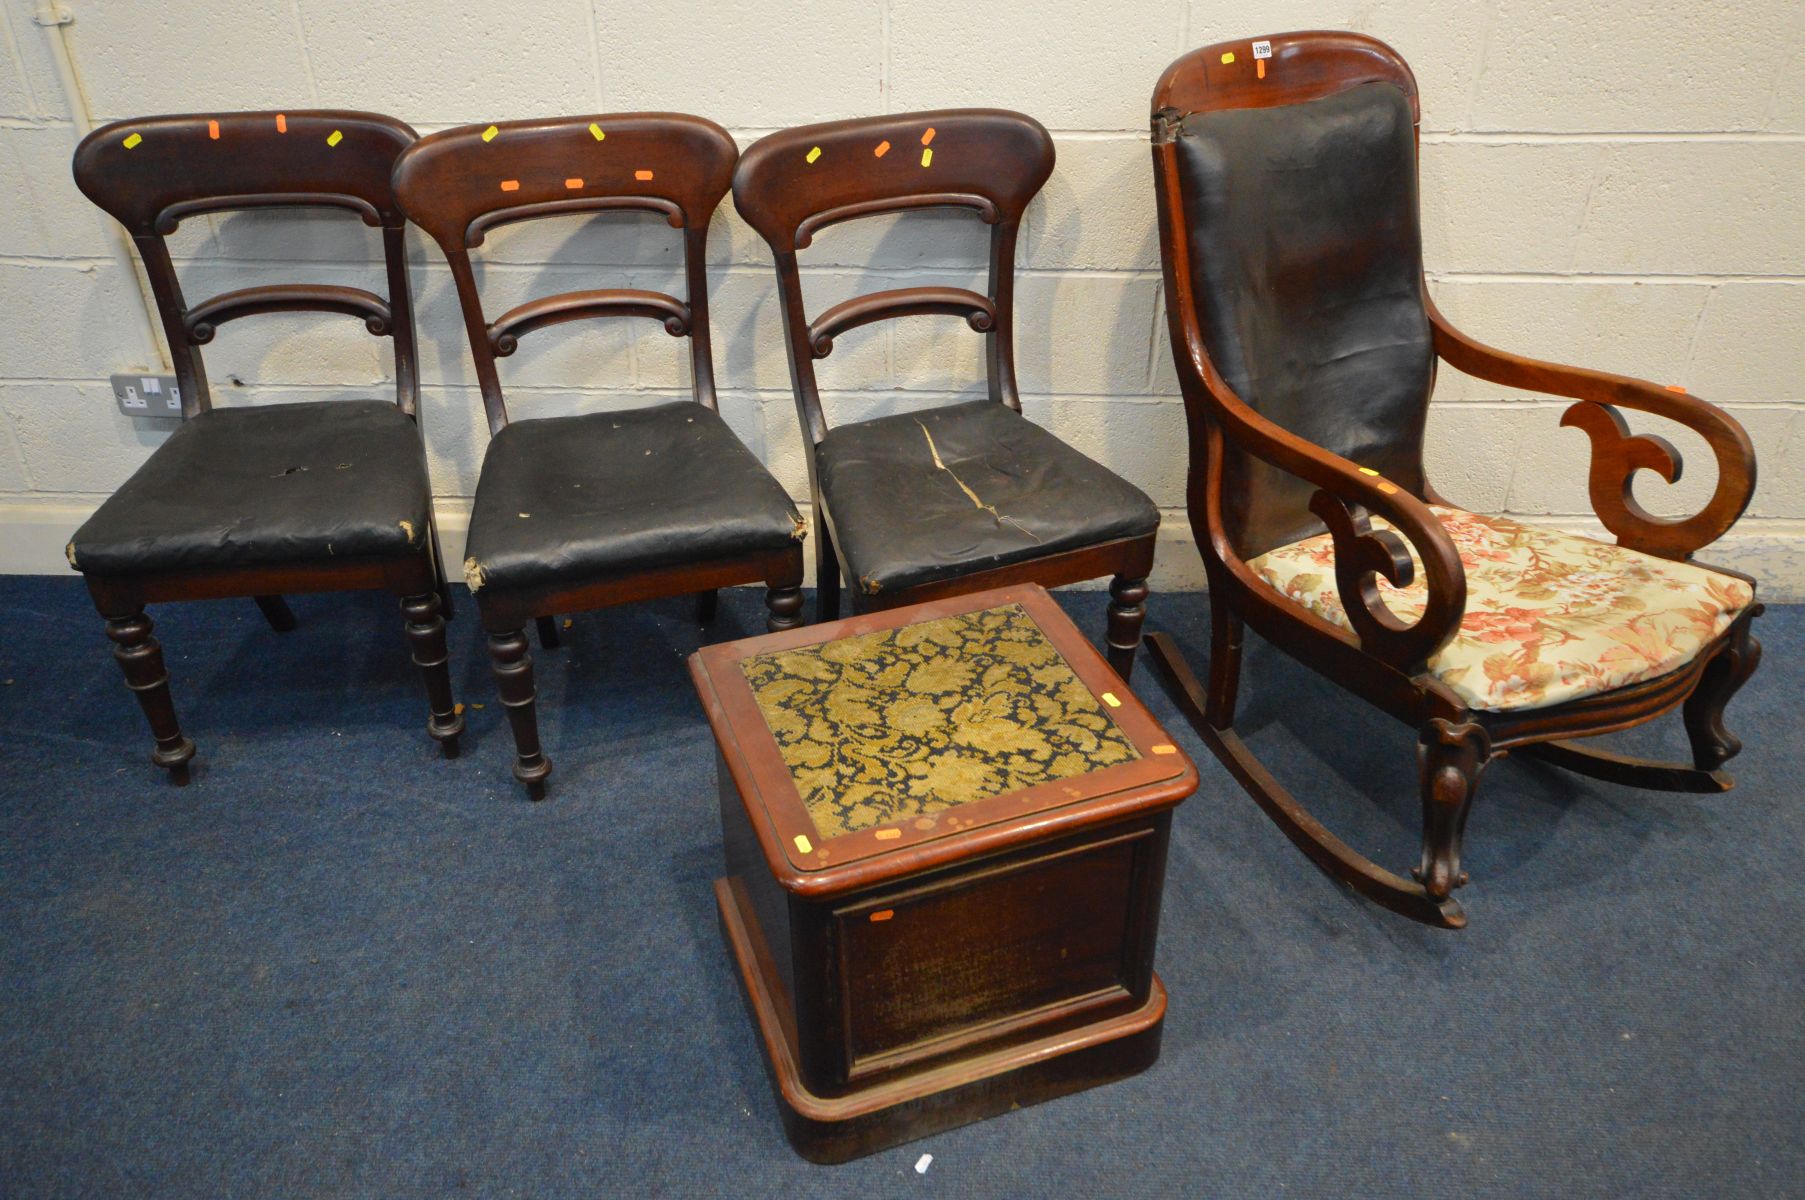 A VICTORIAN MAHOGANY STEP COMMODE, with ceramic bowl together with three Victorian bar back